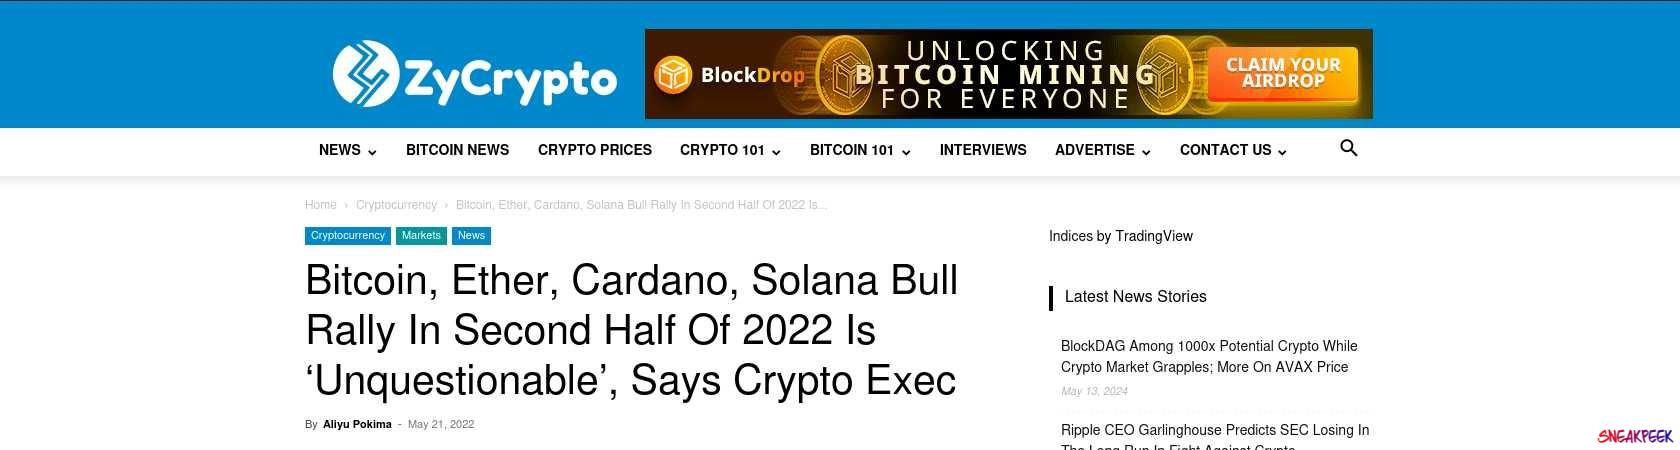 Read the full Article:  ⭲ Bitcoin, Ether, Cardano, Solana Bull Rally In Second Half Of 2022 Is ‘Unquestionable’, Says Crypto Exec